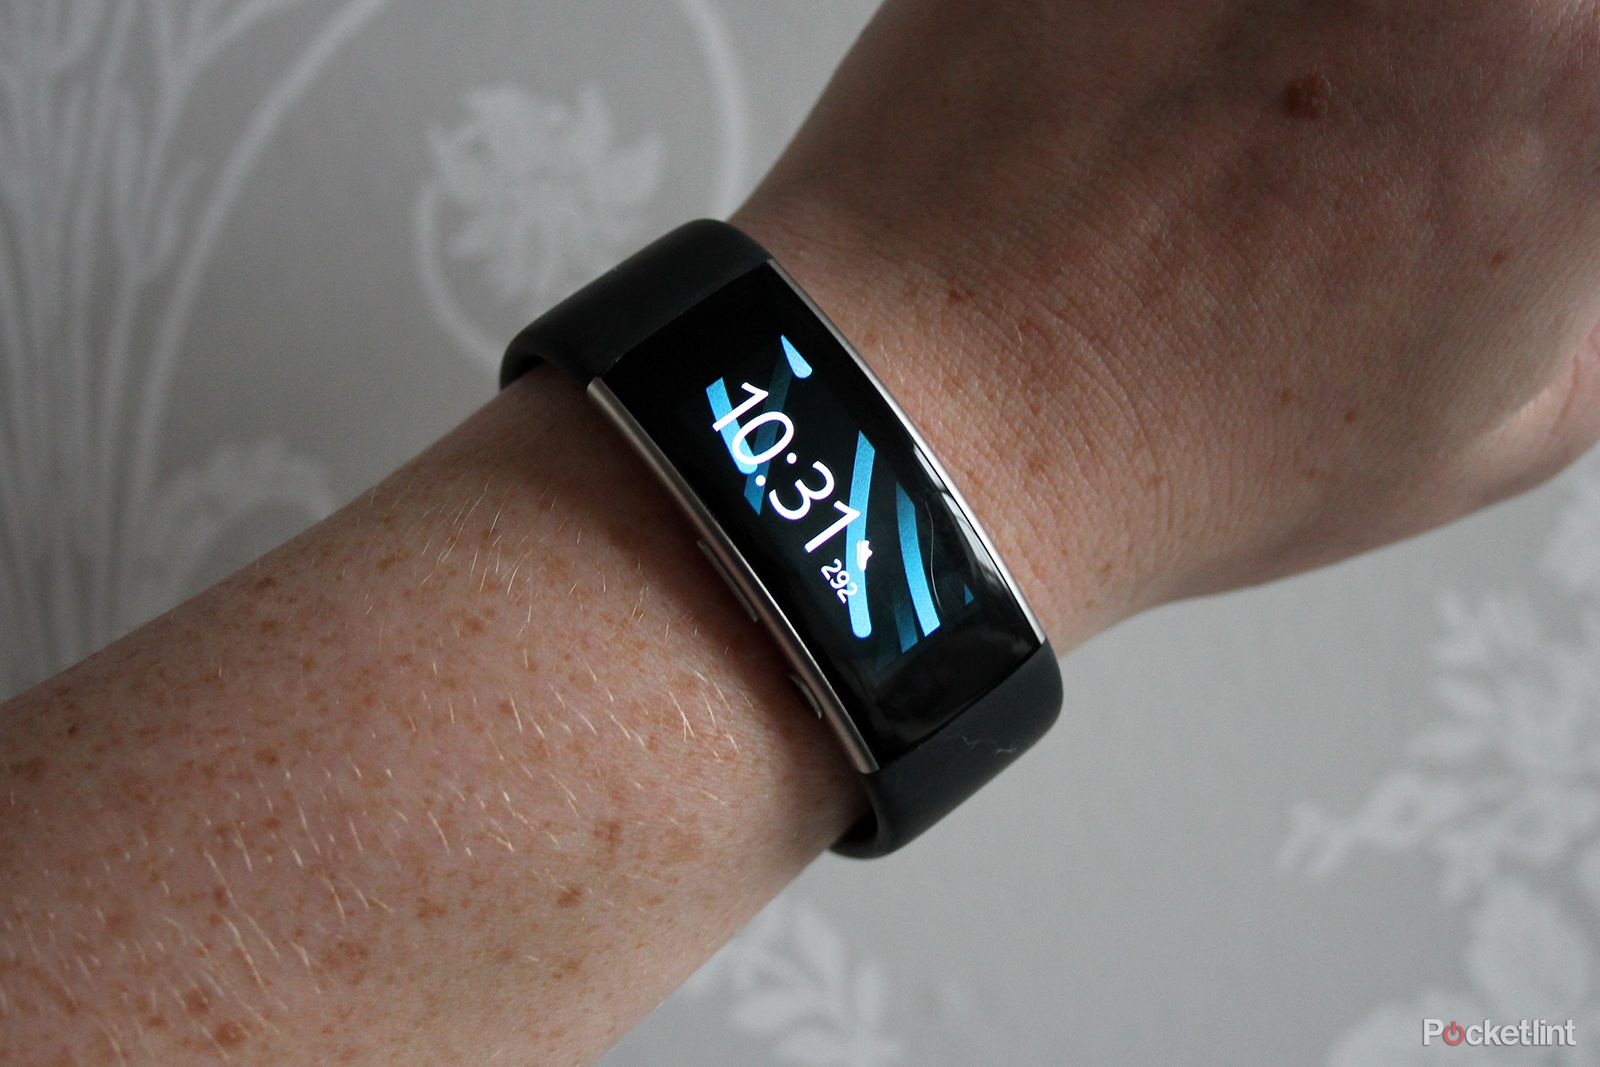 new microsoft band device won t debut this year and maybe never will image 1